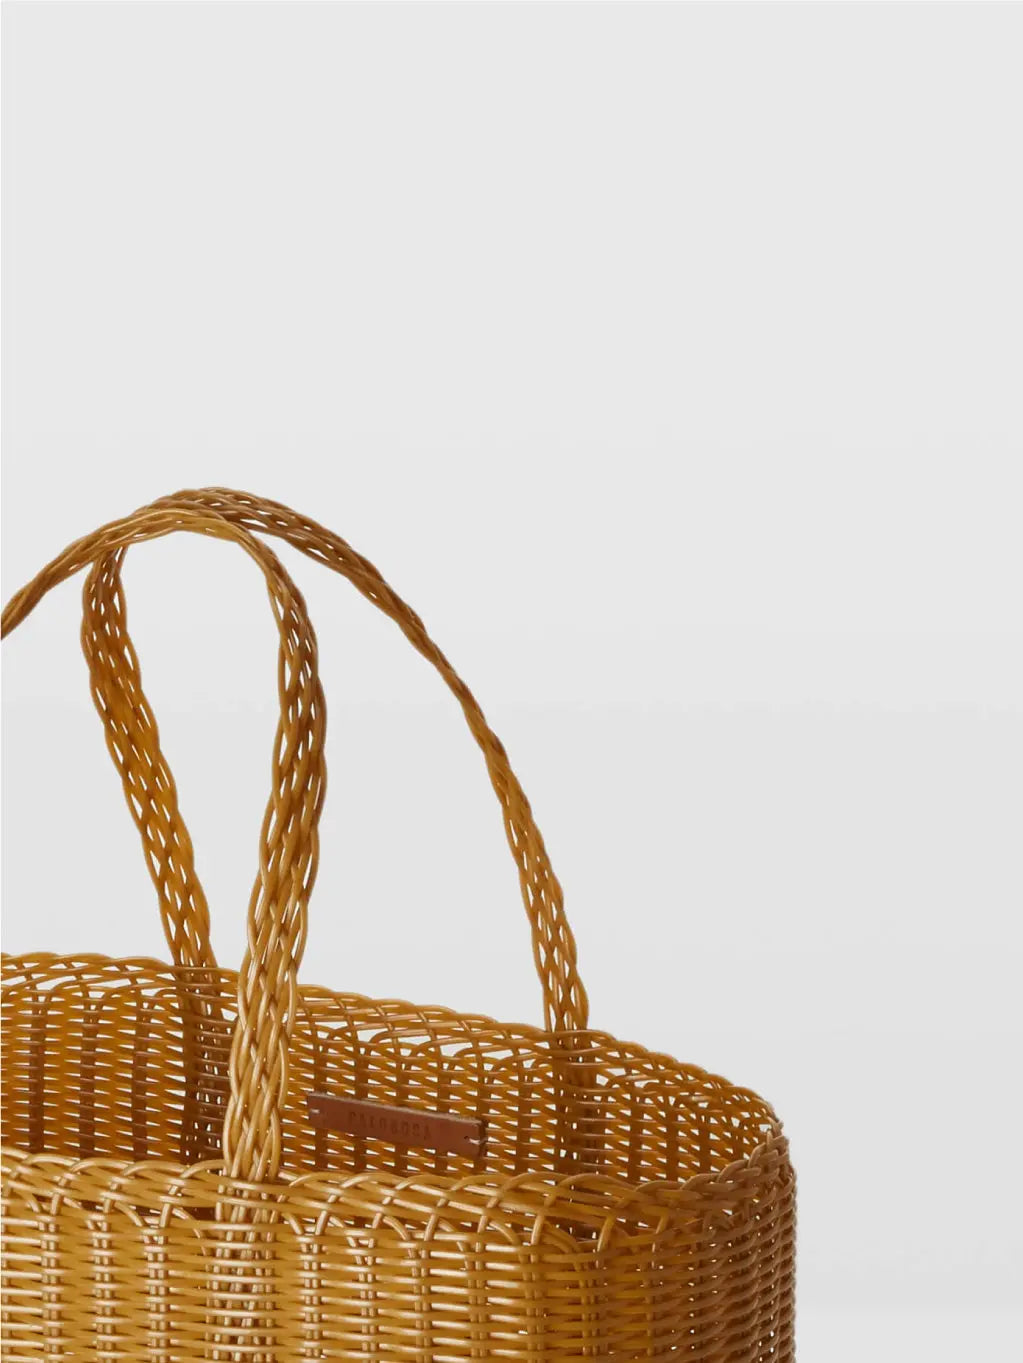 A tan woven straw tote bag, Lace Small Bag Tobacco by Palorosa, with a rectangular shape and two matching handles, available at bassalstore. The bag features an open, airy weave design and is displayed on a simple white background.